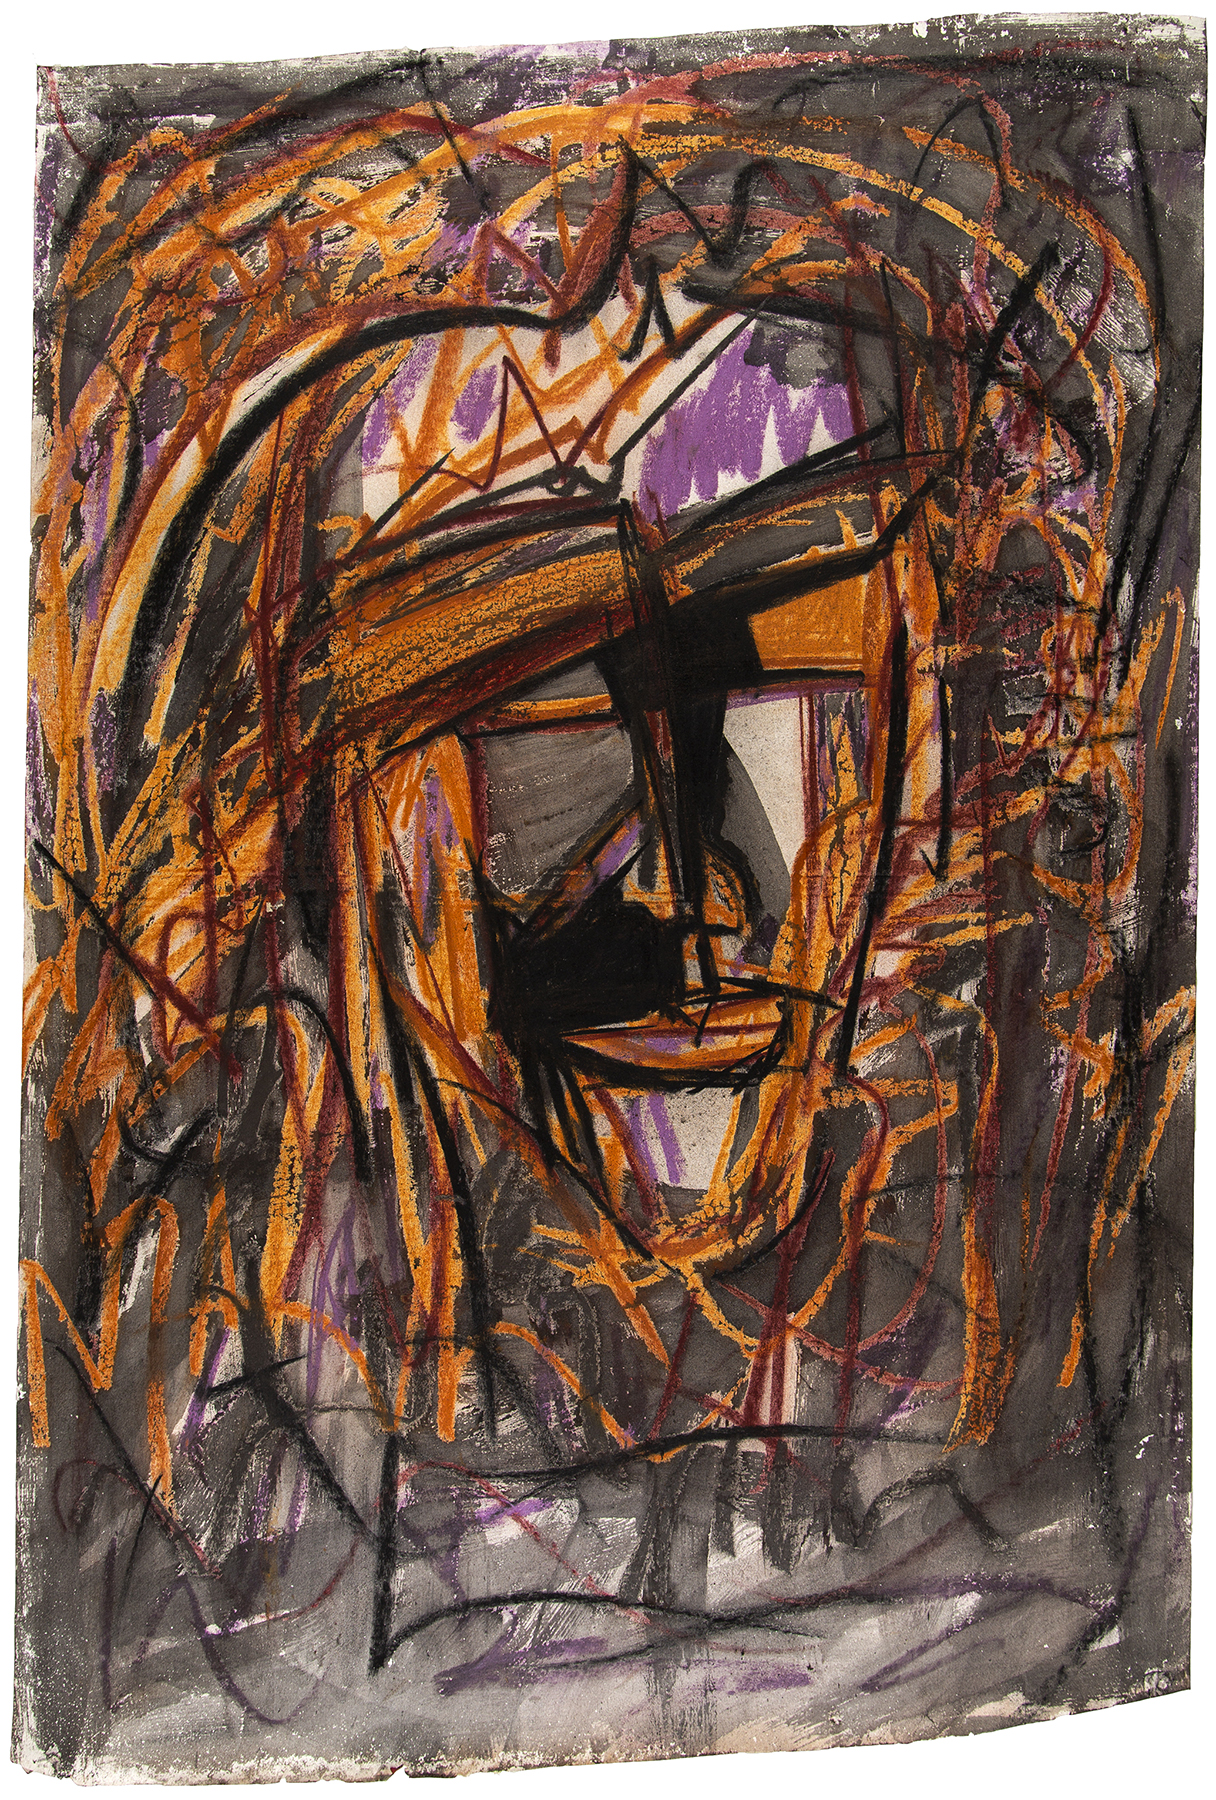 Abstract drawing of a figure's face in black, grey and orange